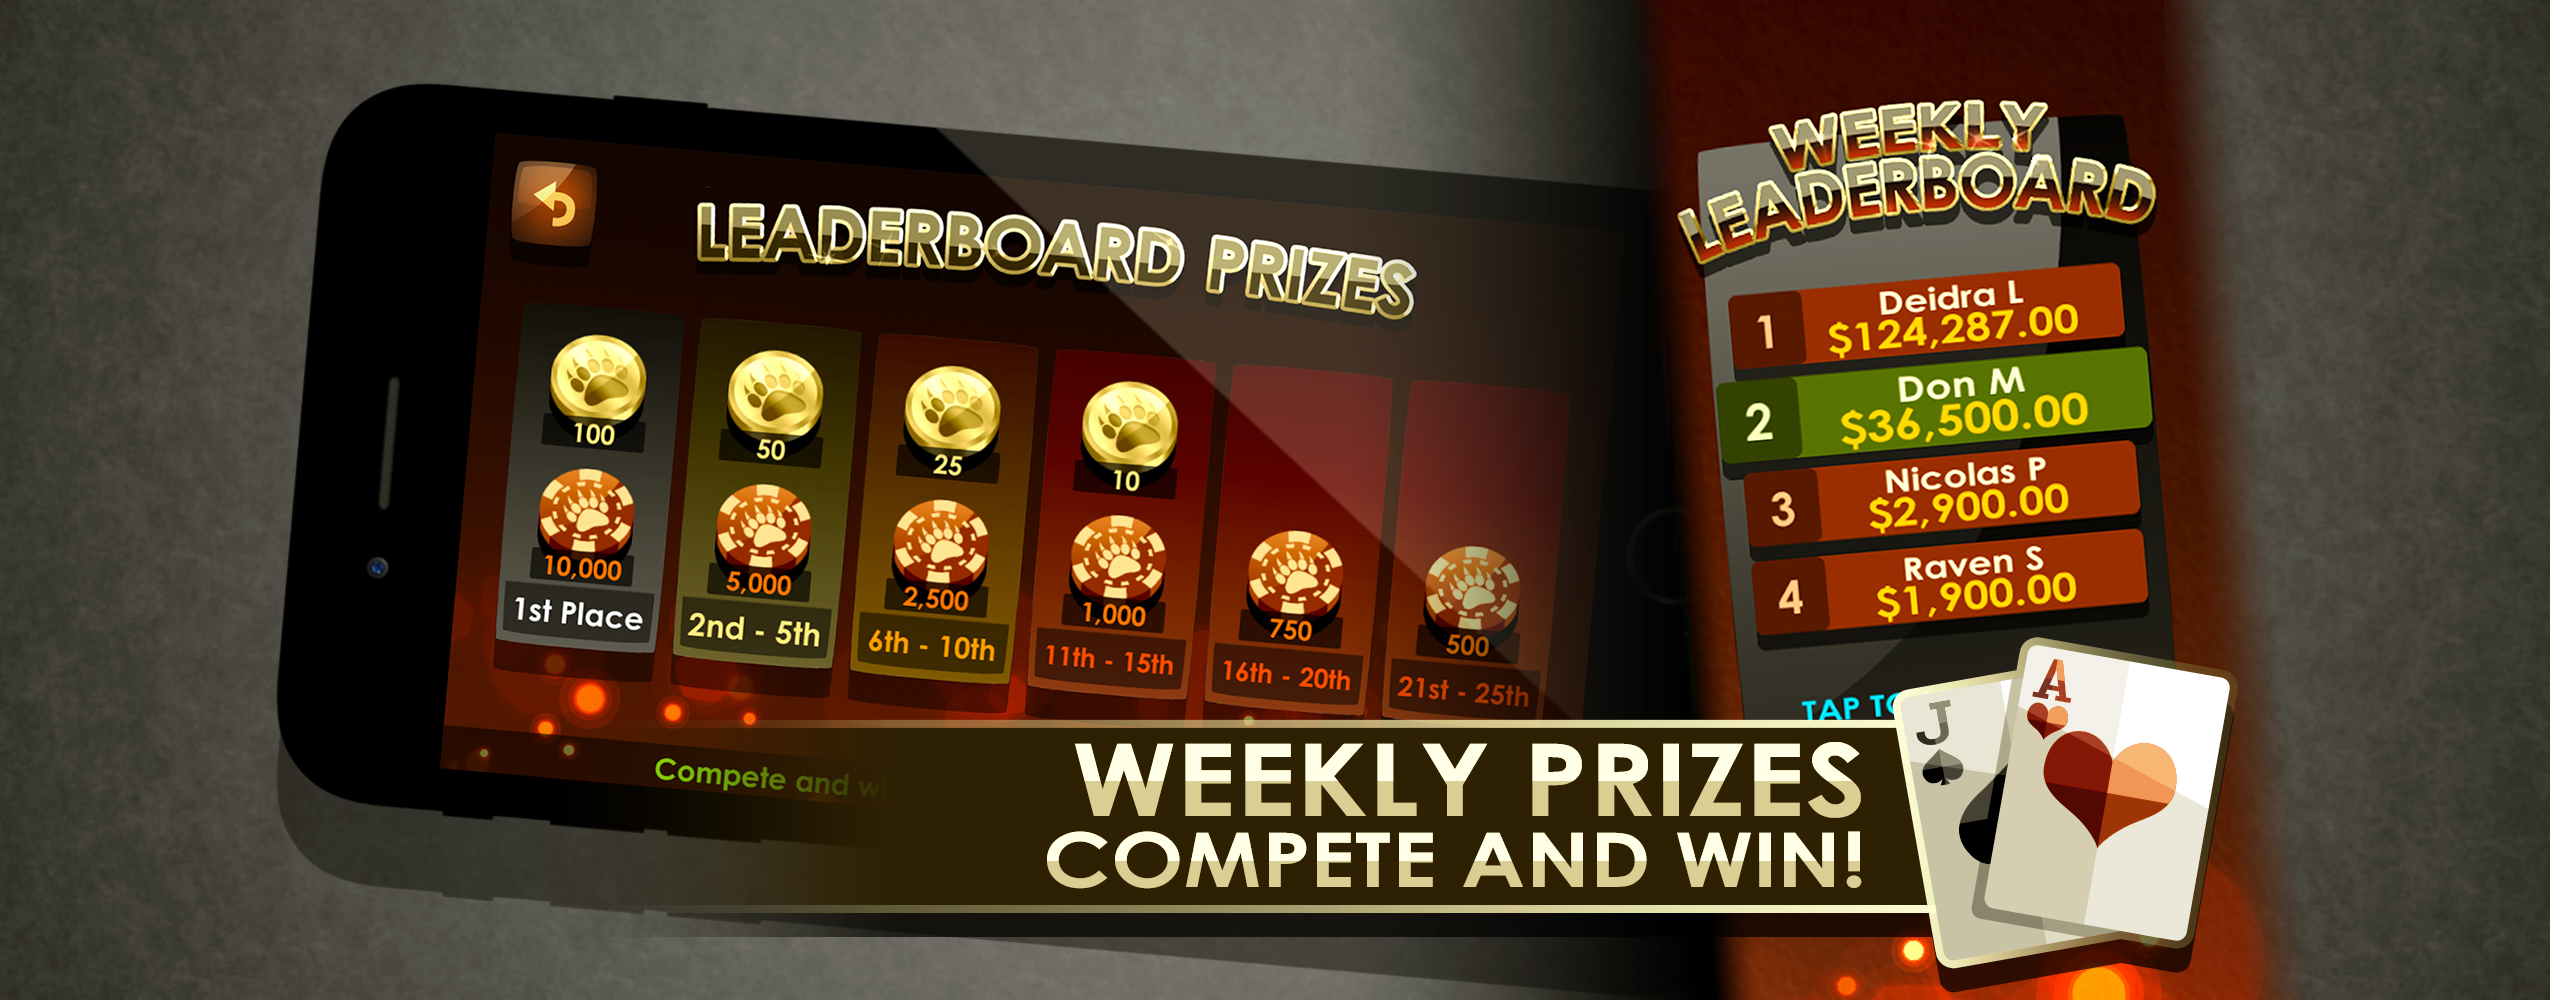 Weekly Prizes!